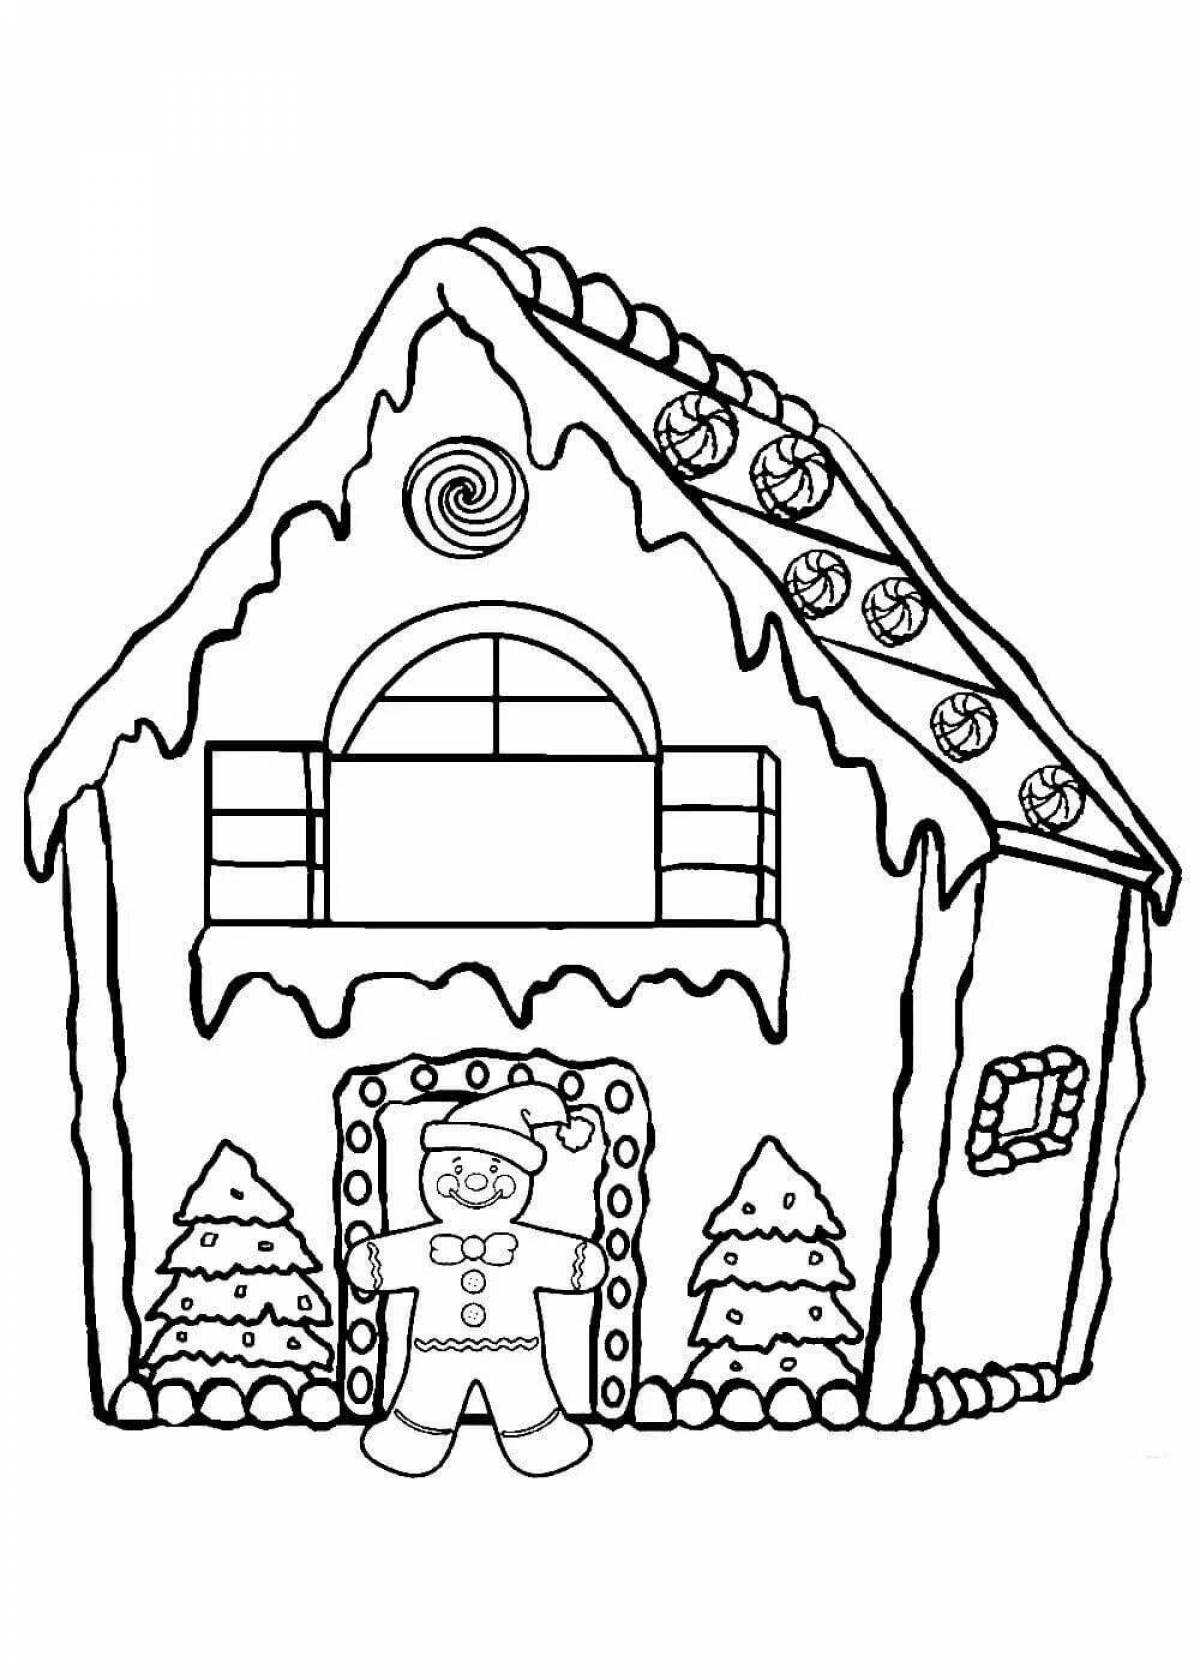 Fairy house coloring book